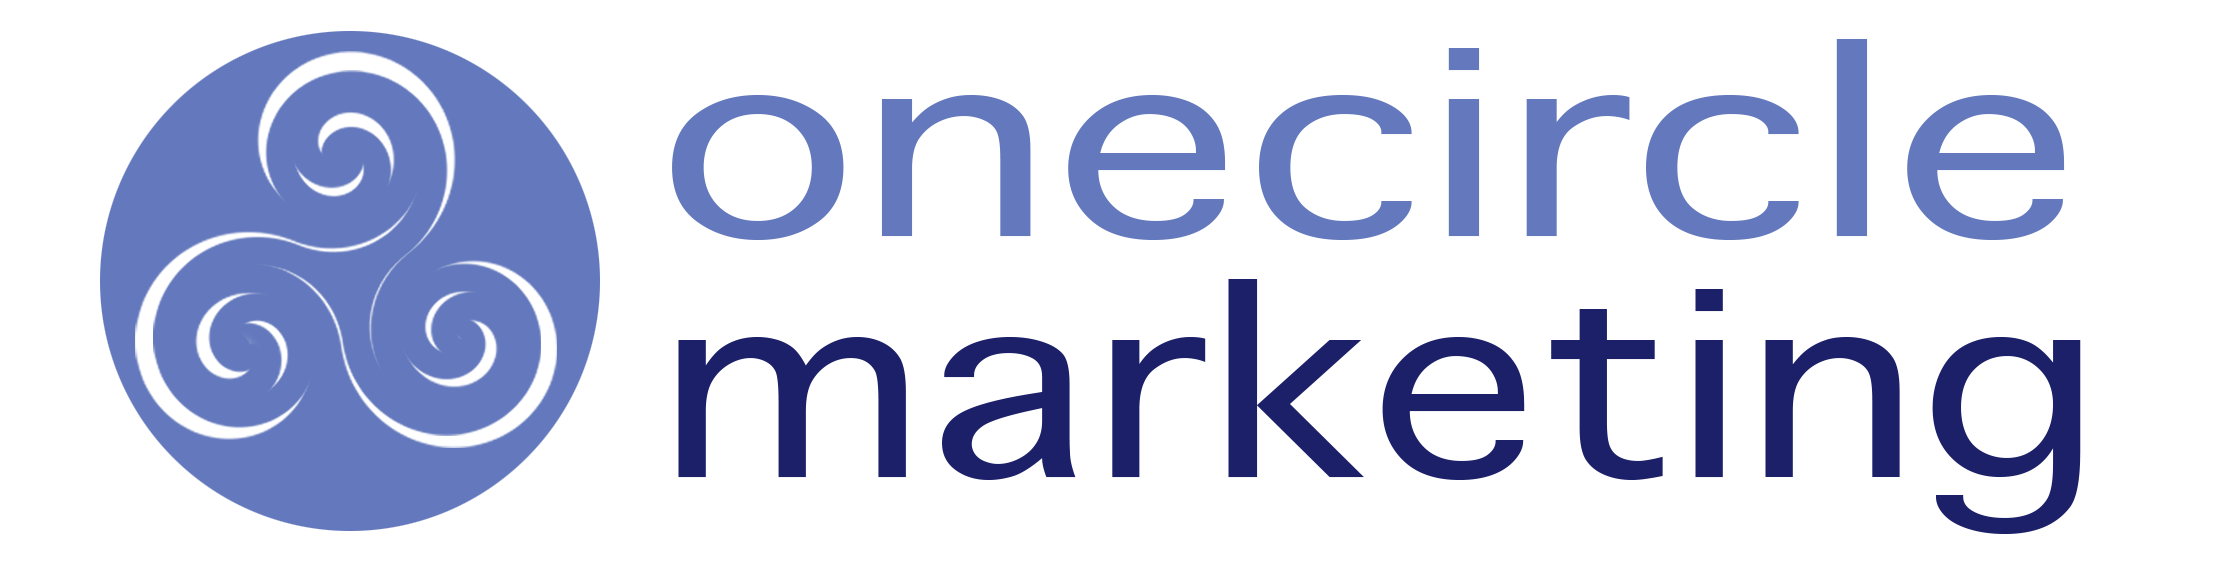 OneCircle Marketing Services